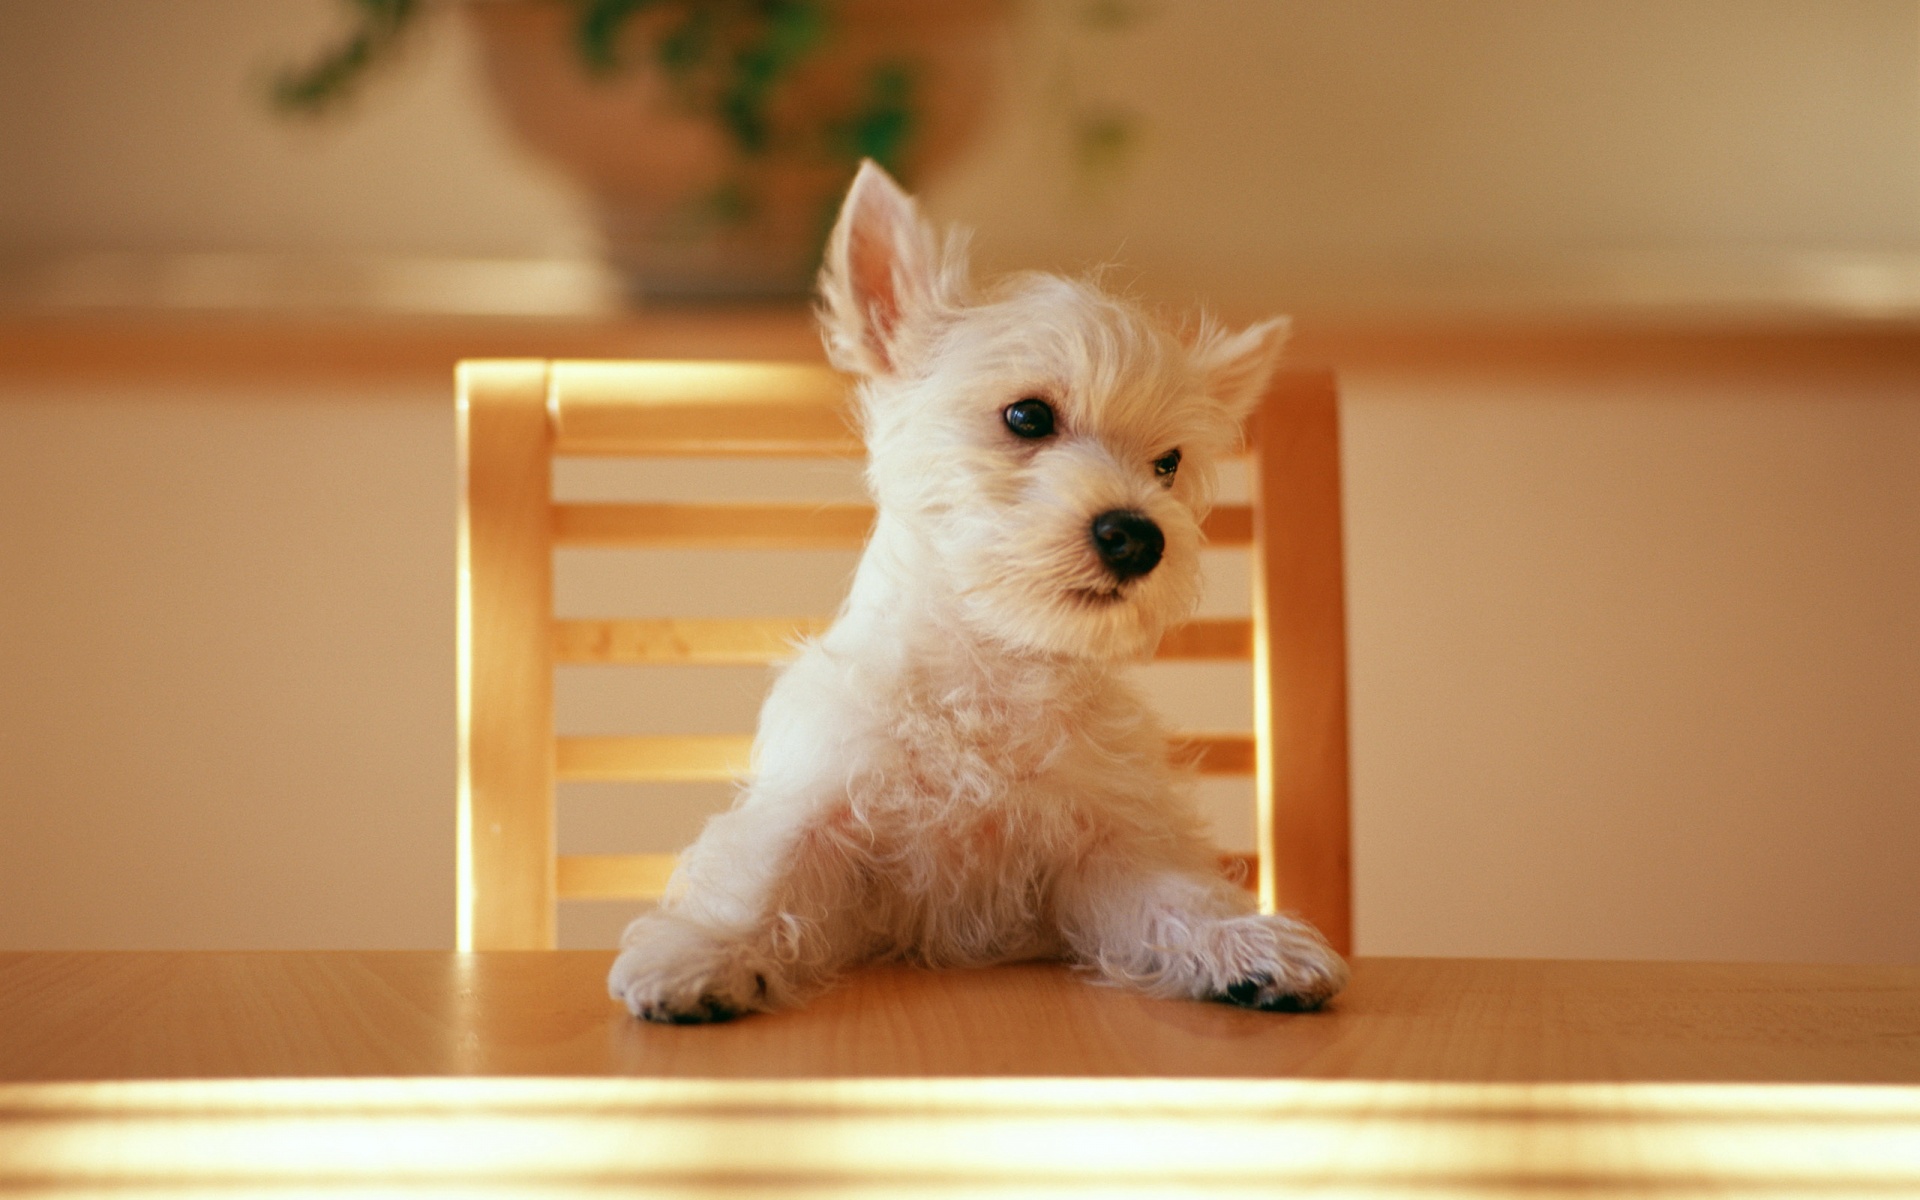 Dog at the table